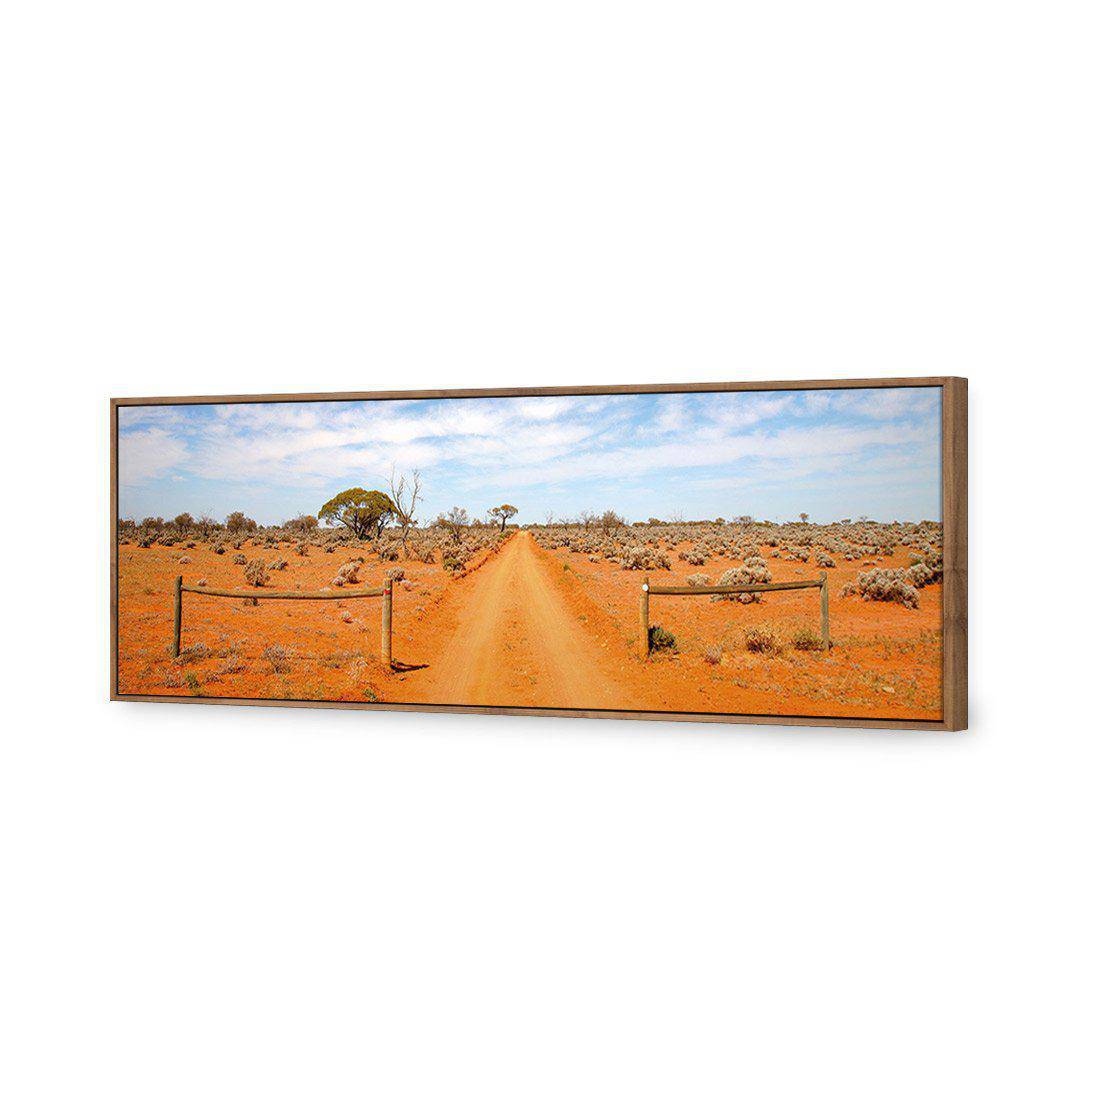 Outback Road Canvas Art-Canvas-Wall Art Designs-60x20cm-Canvas - Natural Frame-Wall Art Designs